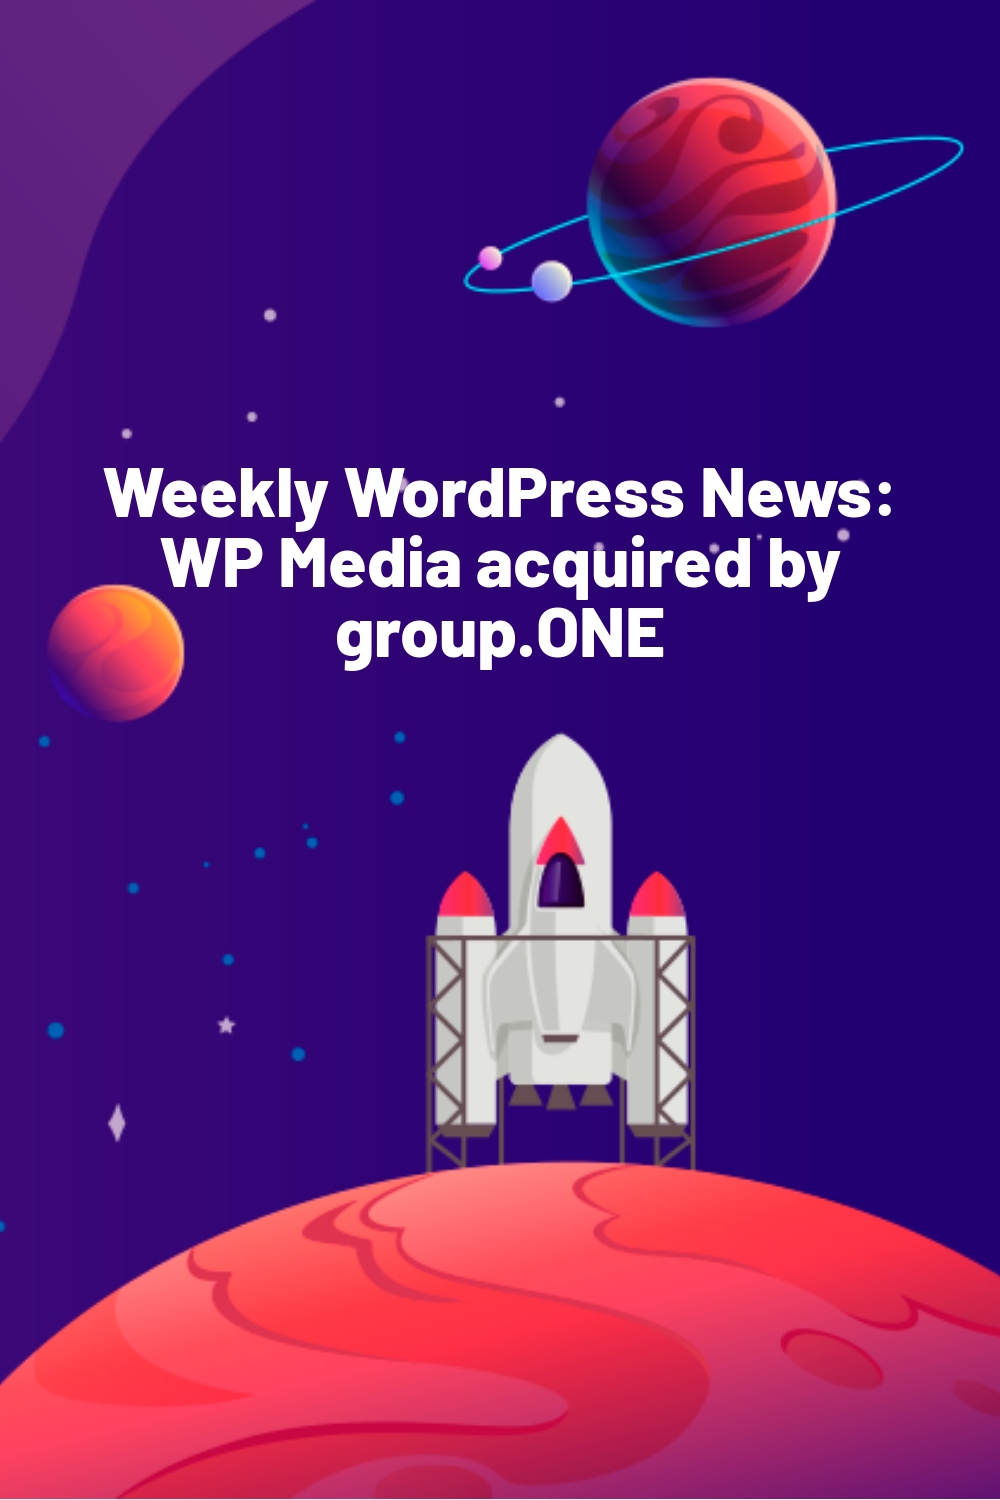 Weekly WordPress News: WP Media acquired by group.ONE